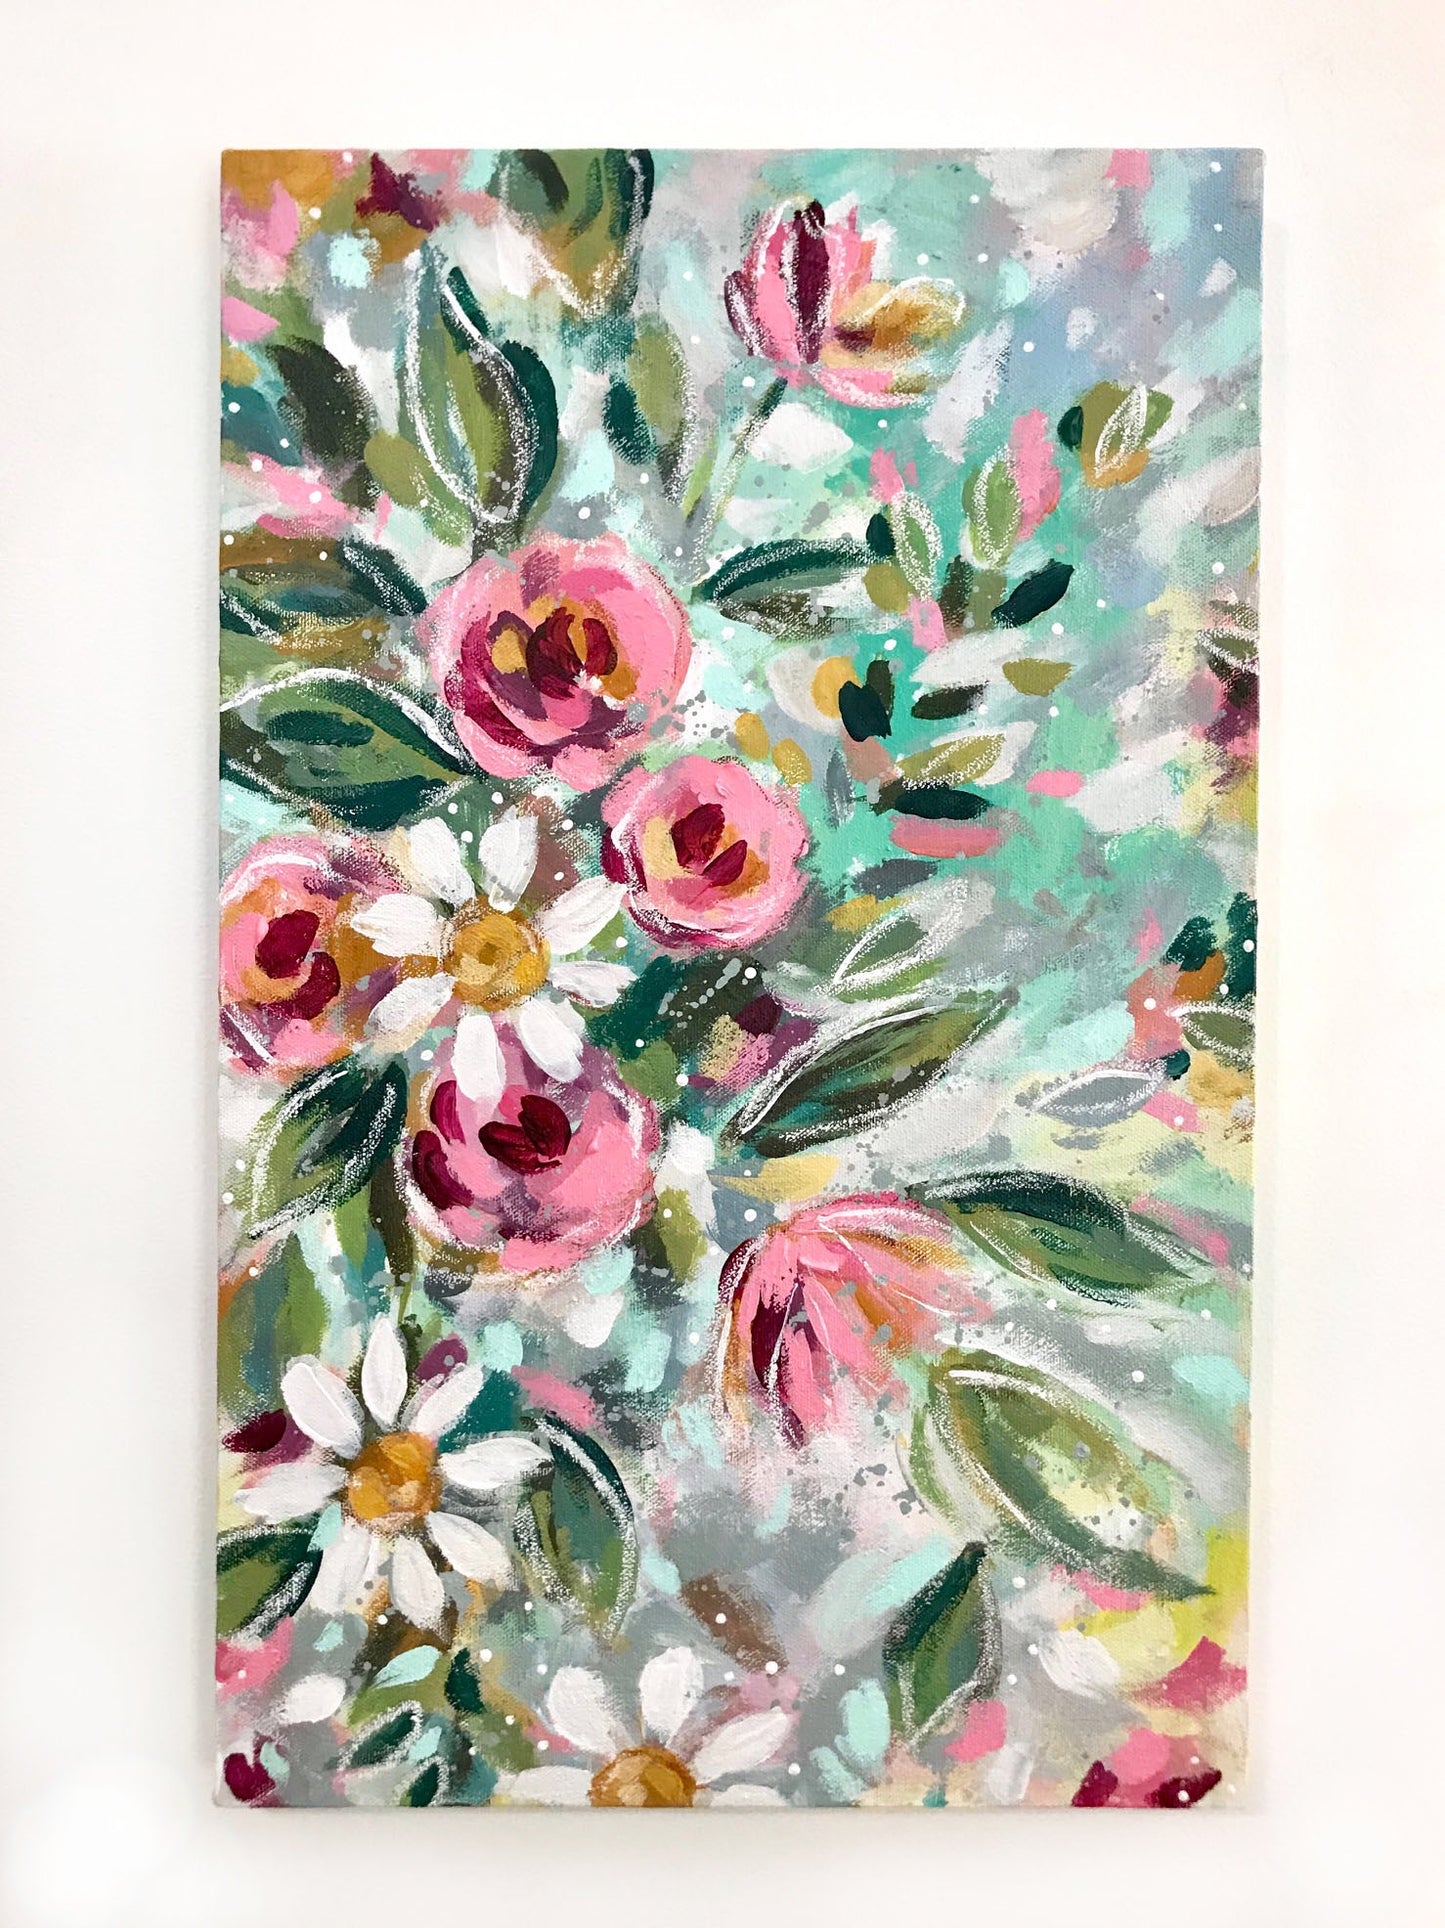 New Spring Floral Mixed Media Painting on 12.5x20 inch canvas no.2 - Bethany Joy Art